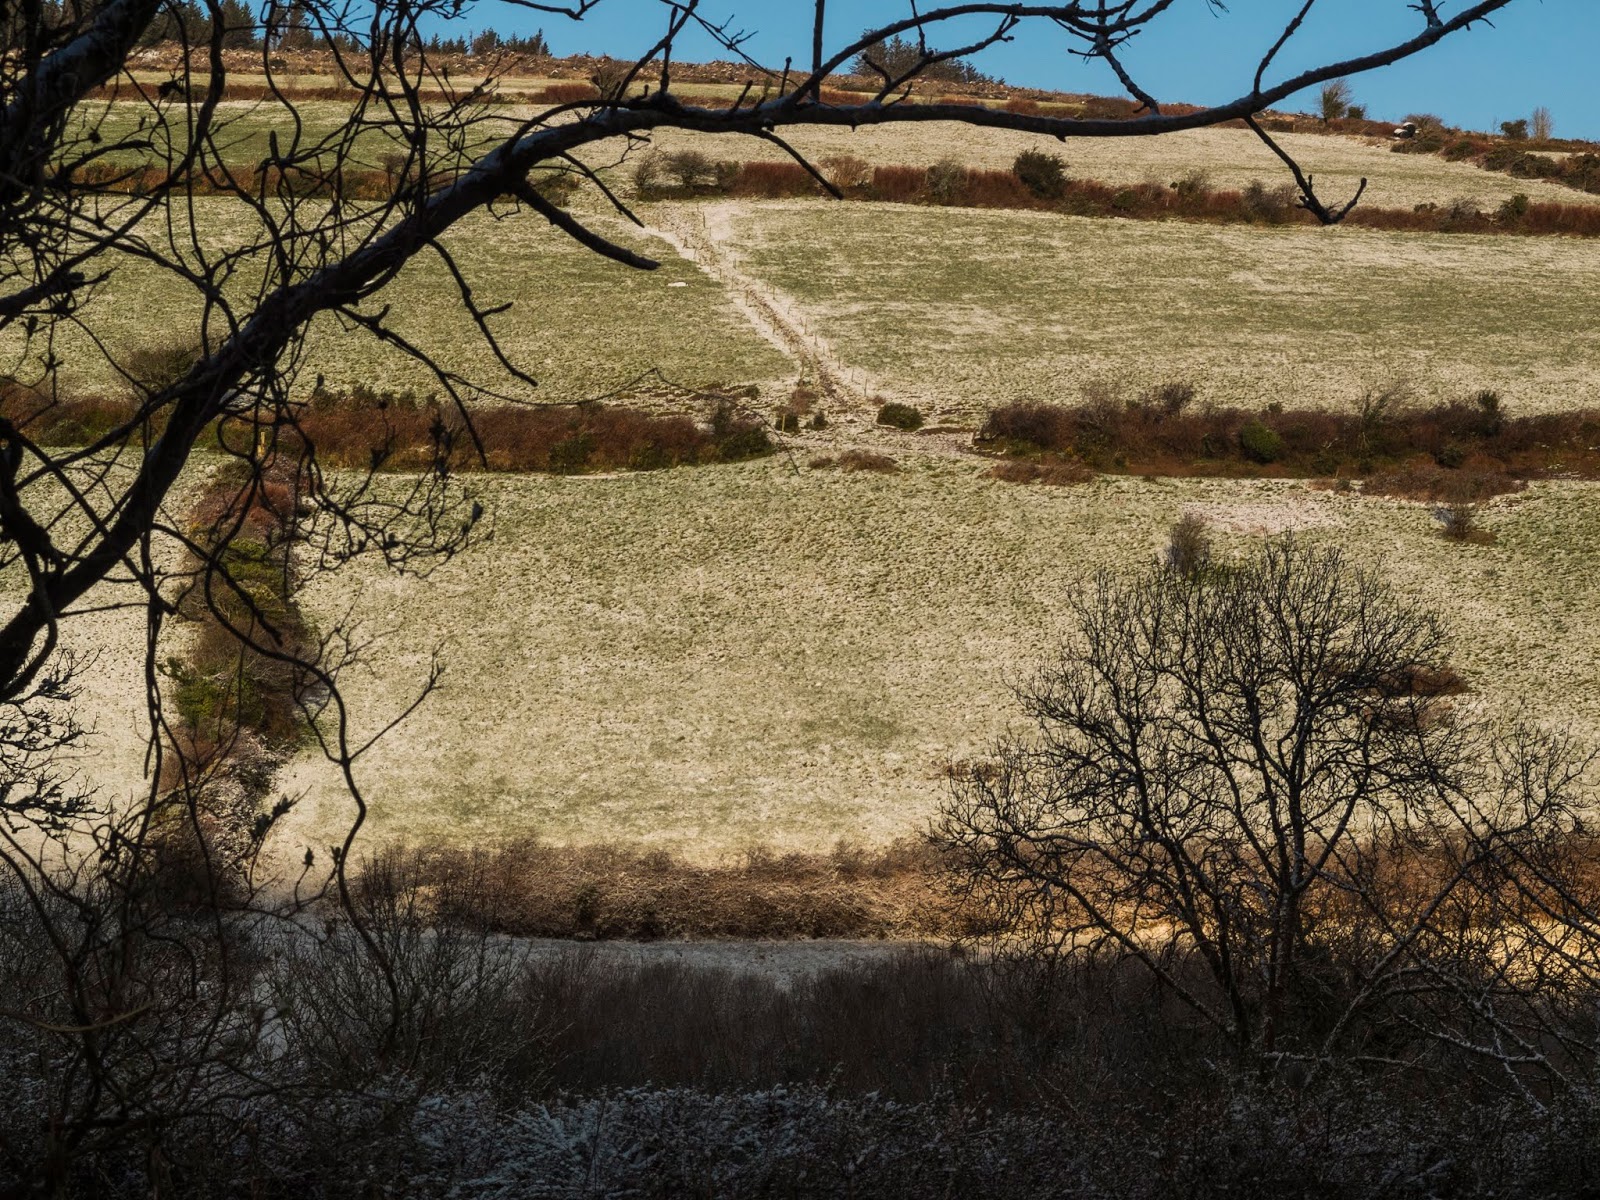 Sunny hillside dusted with snow and a band of shadow along the foreground framed by a tree branch.